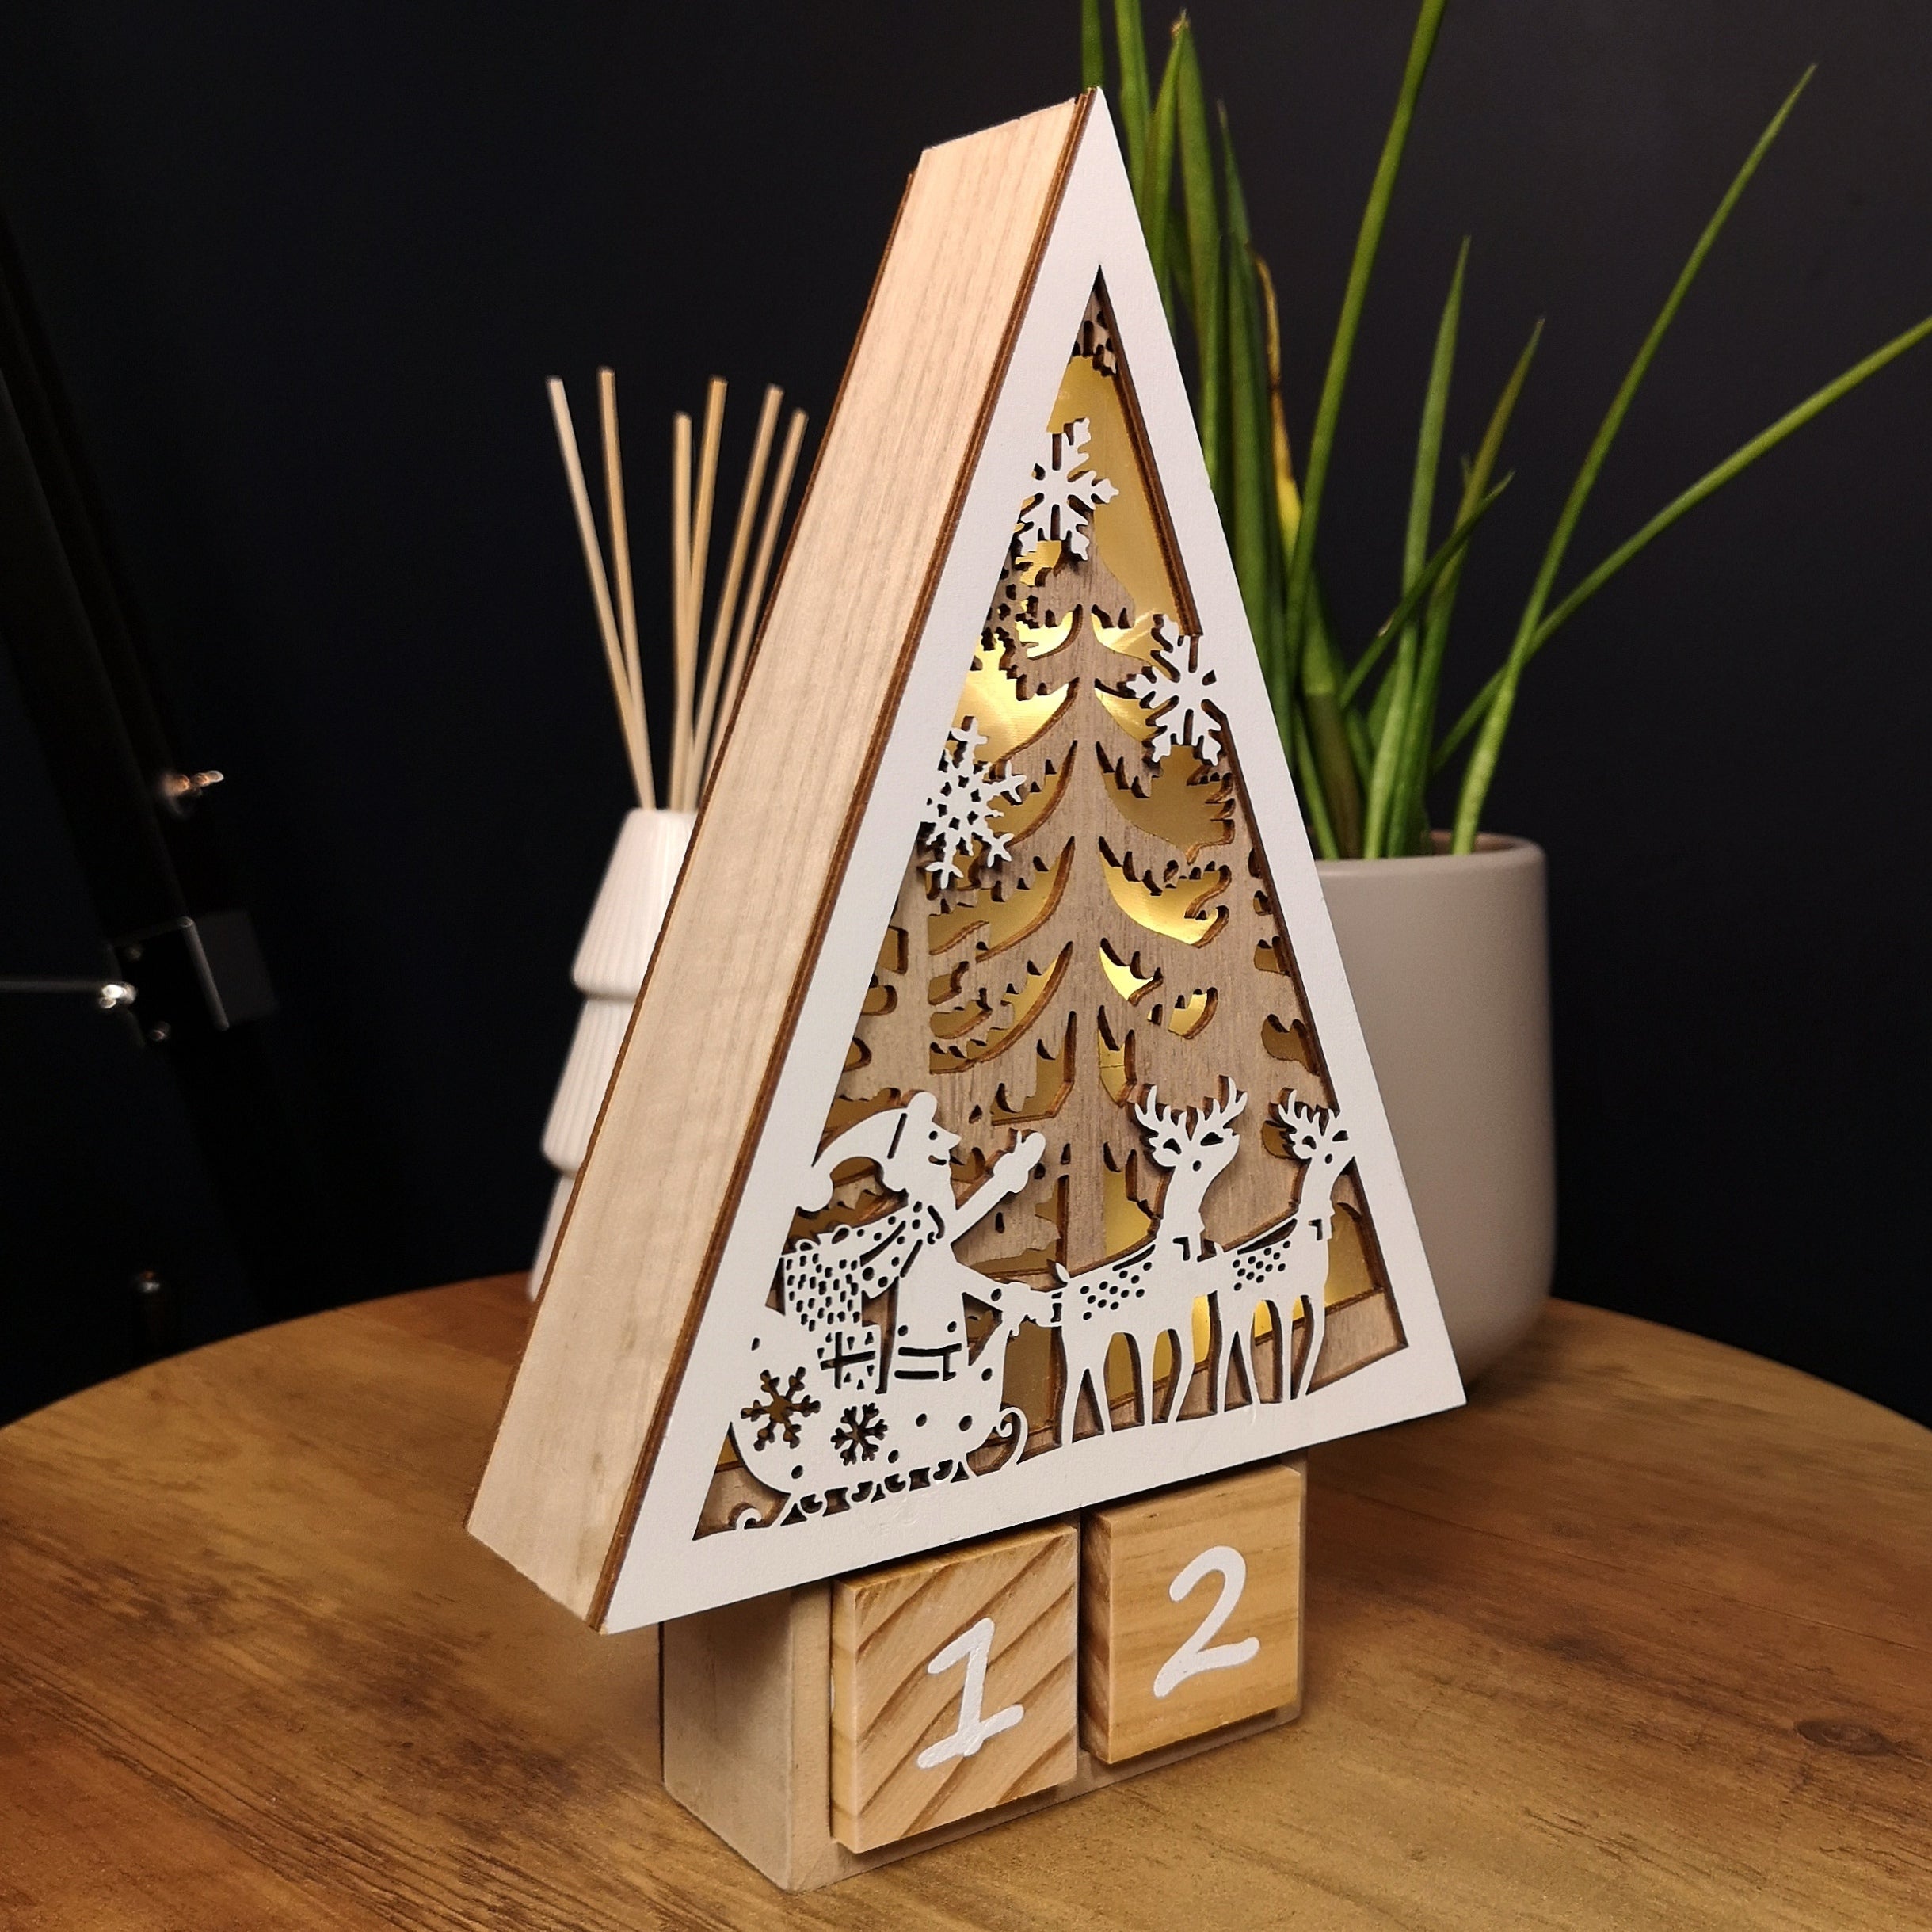 25cm Wooden Christmas Countdown Decoration with Warm White LEDs